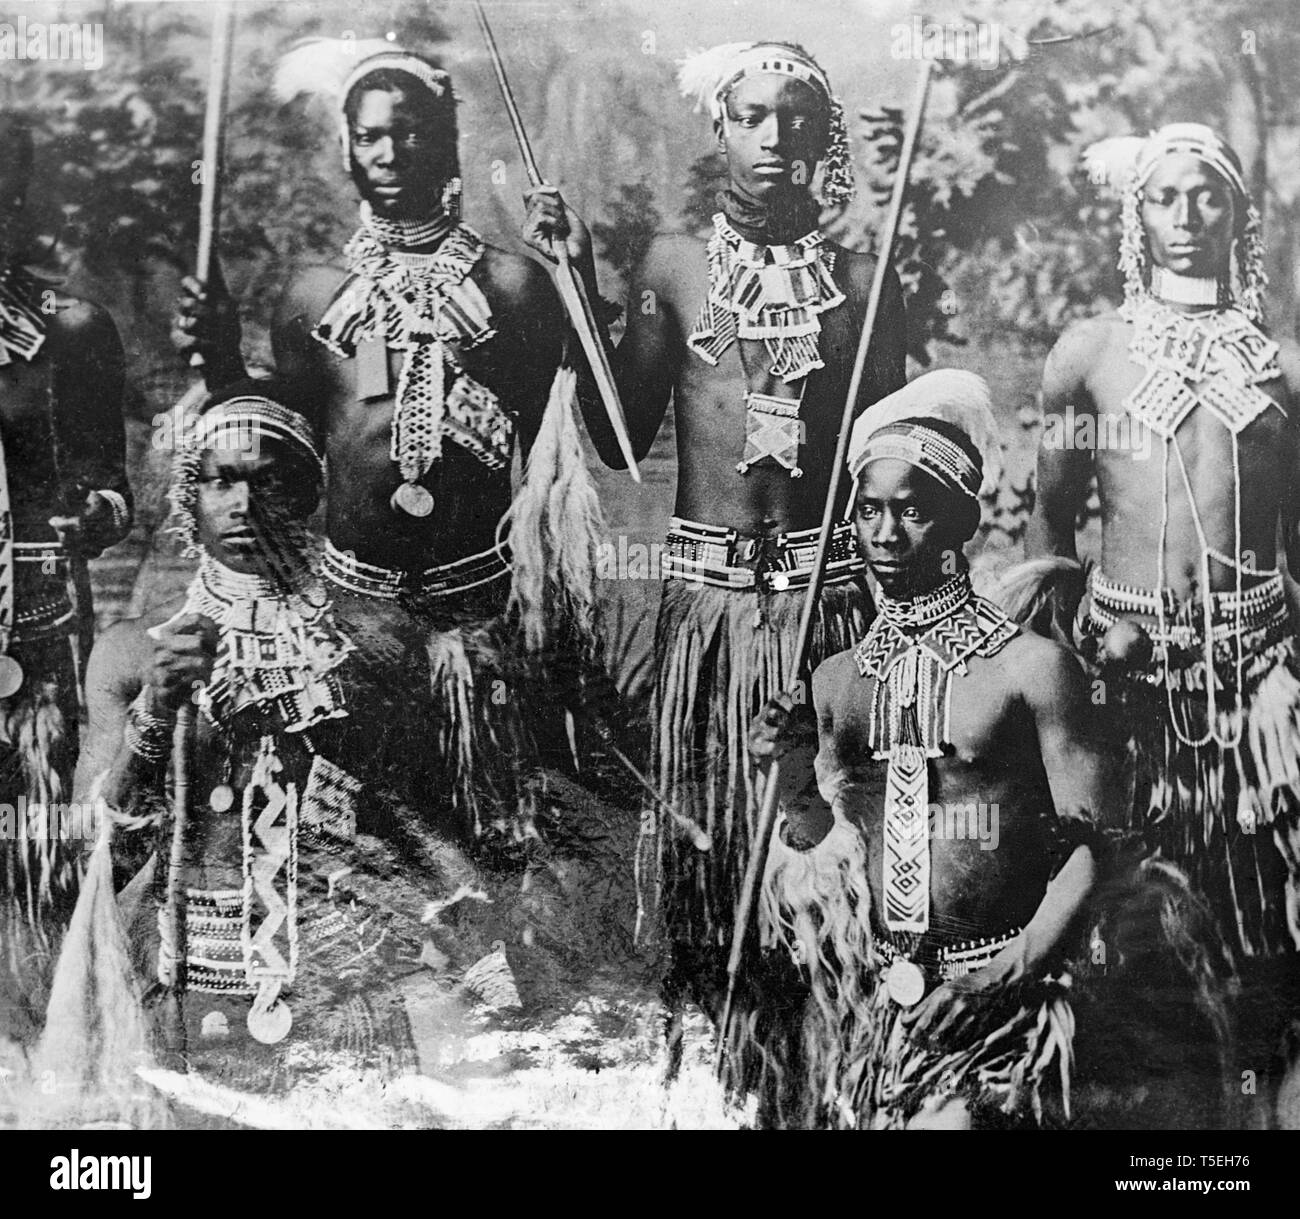 A photograph of Zulu warriors during the Boer War in Southern Africa. Stock Photo